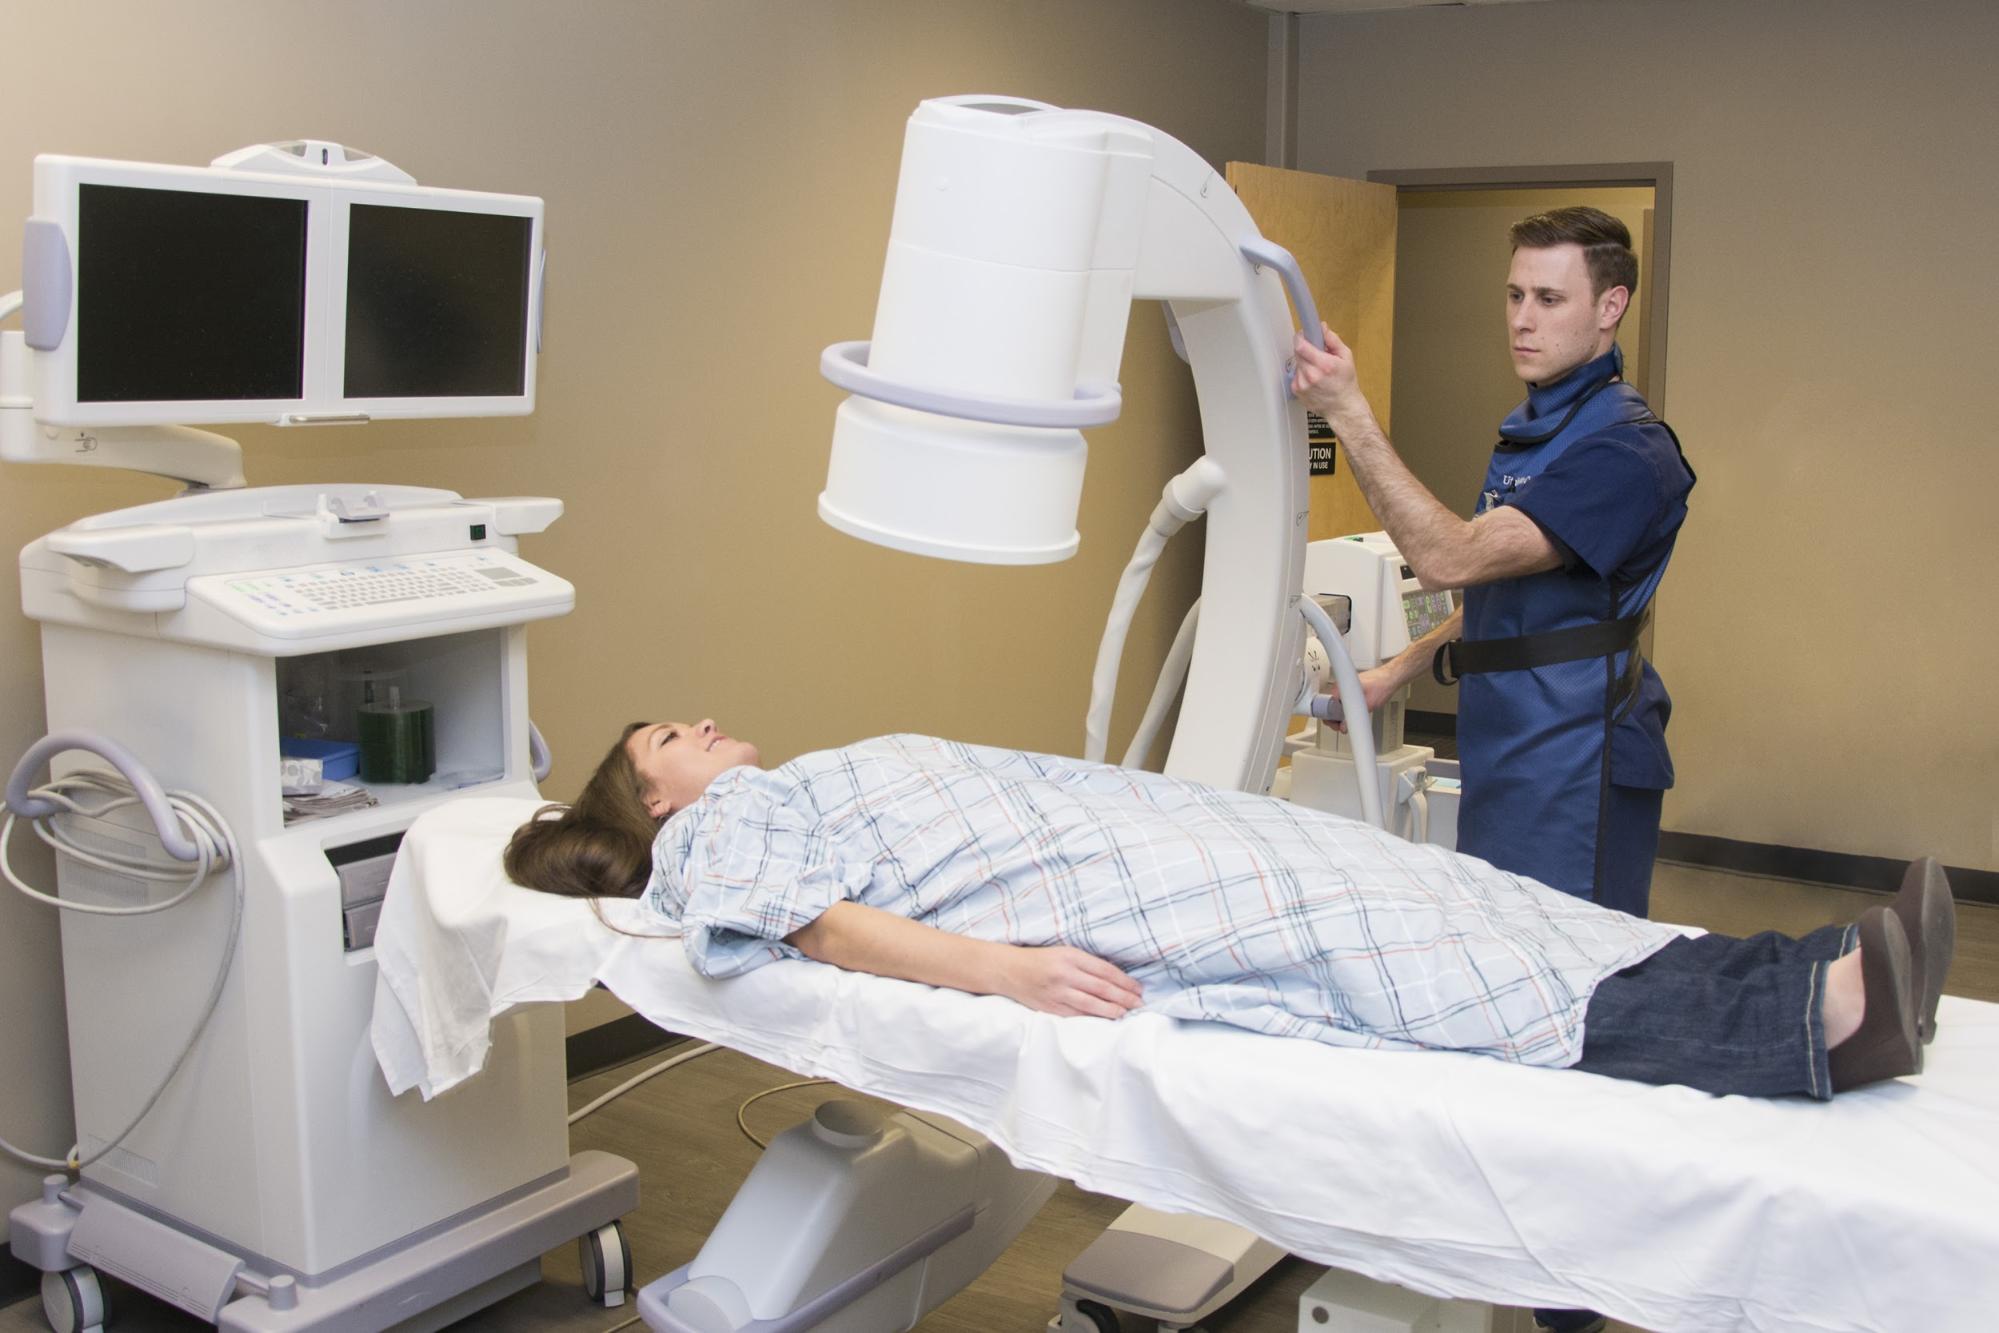 Radiology technician doing an X-ray test on a patient